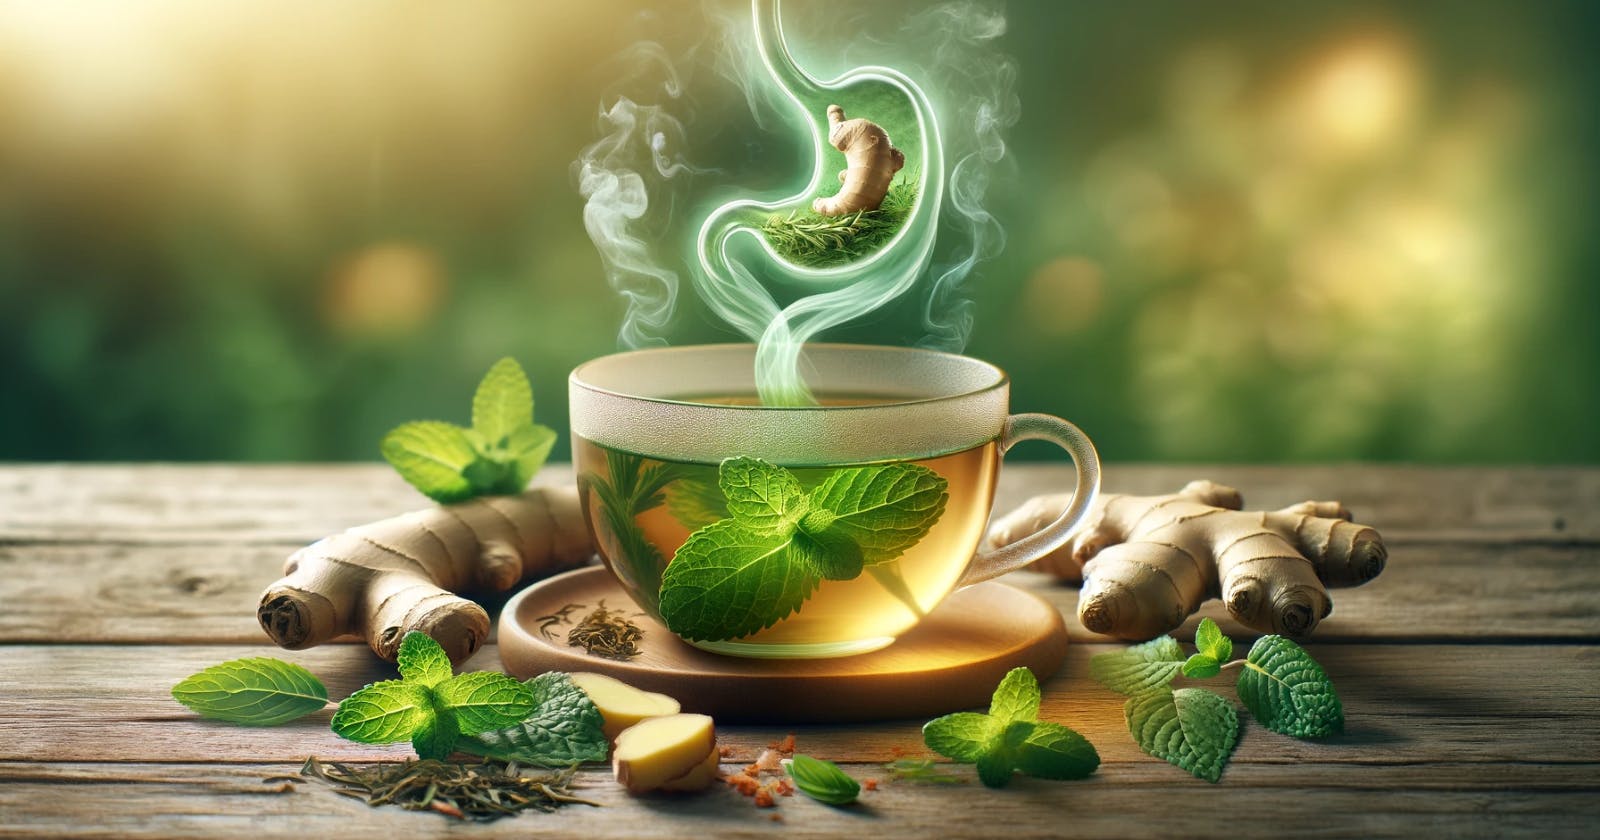 Does Green Tea Help with Bloating?